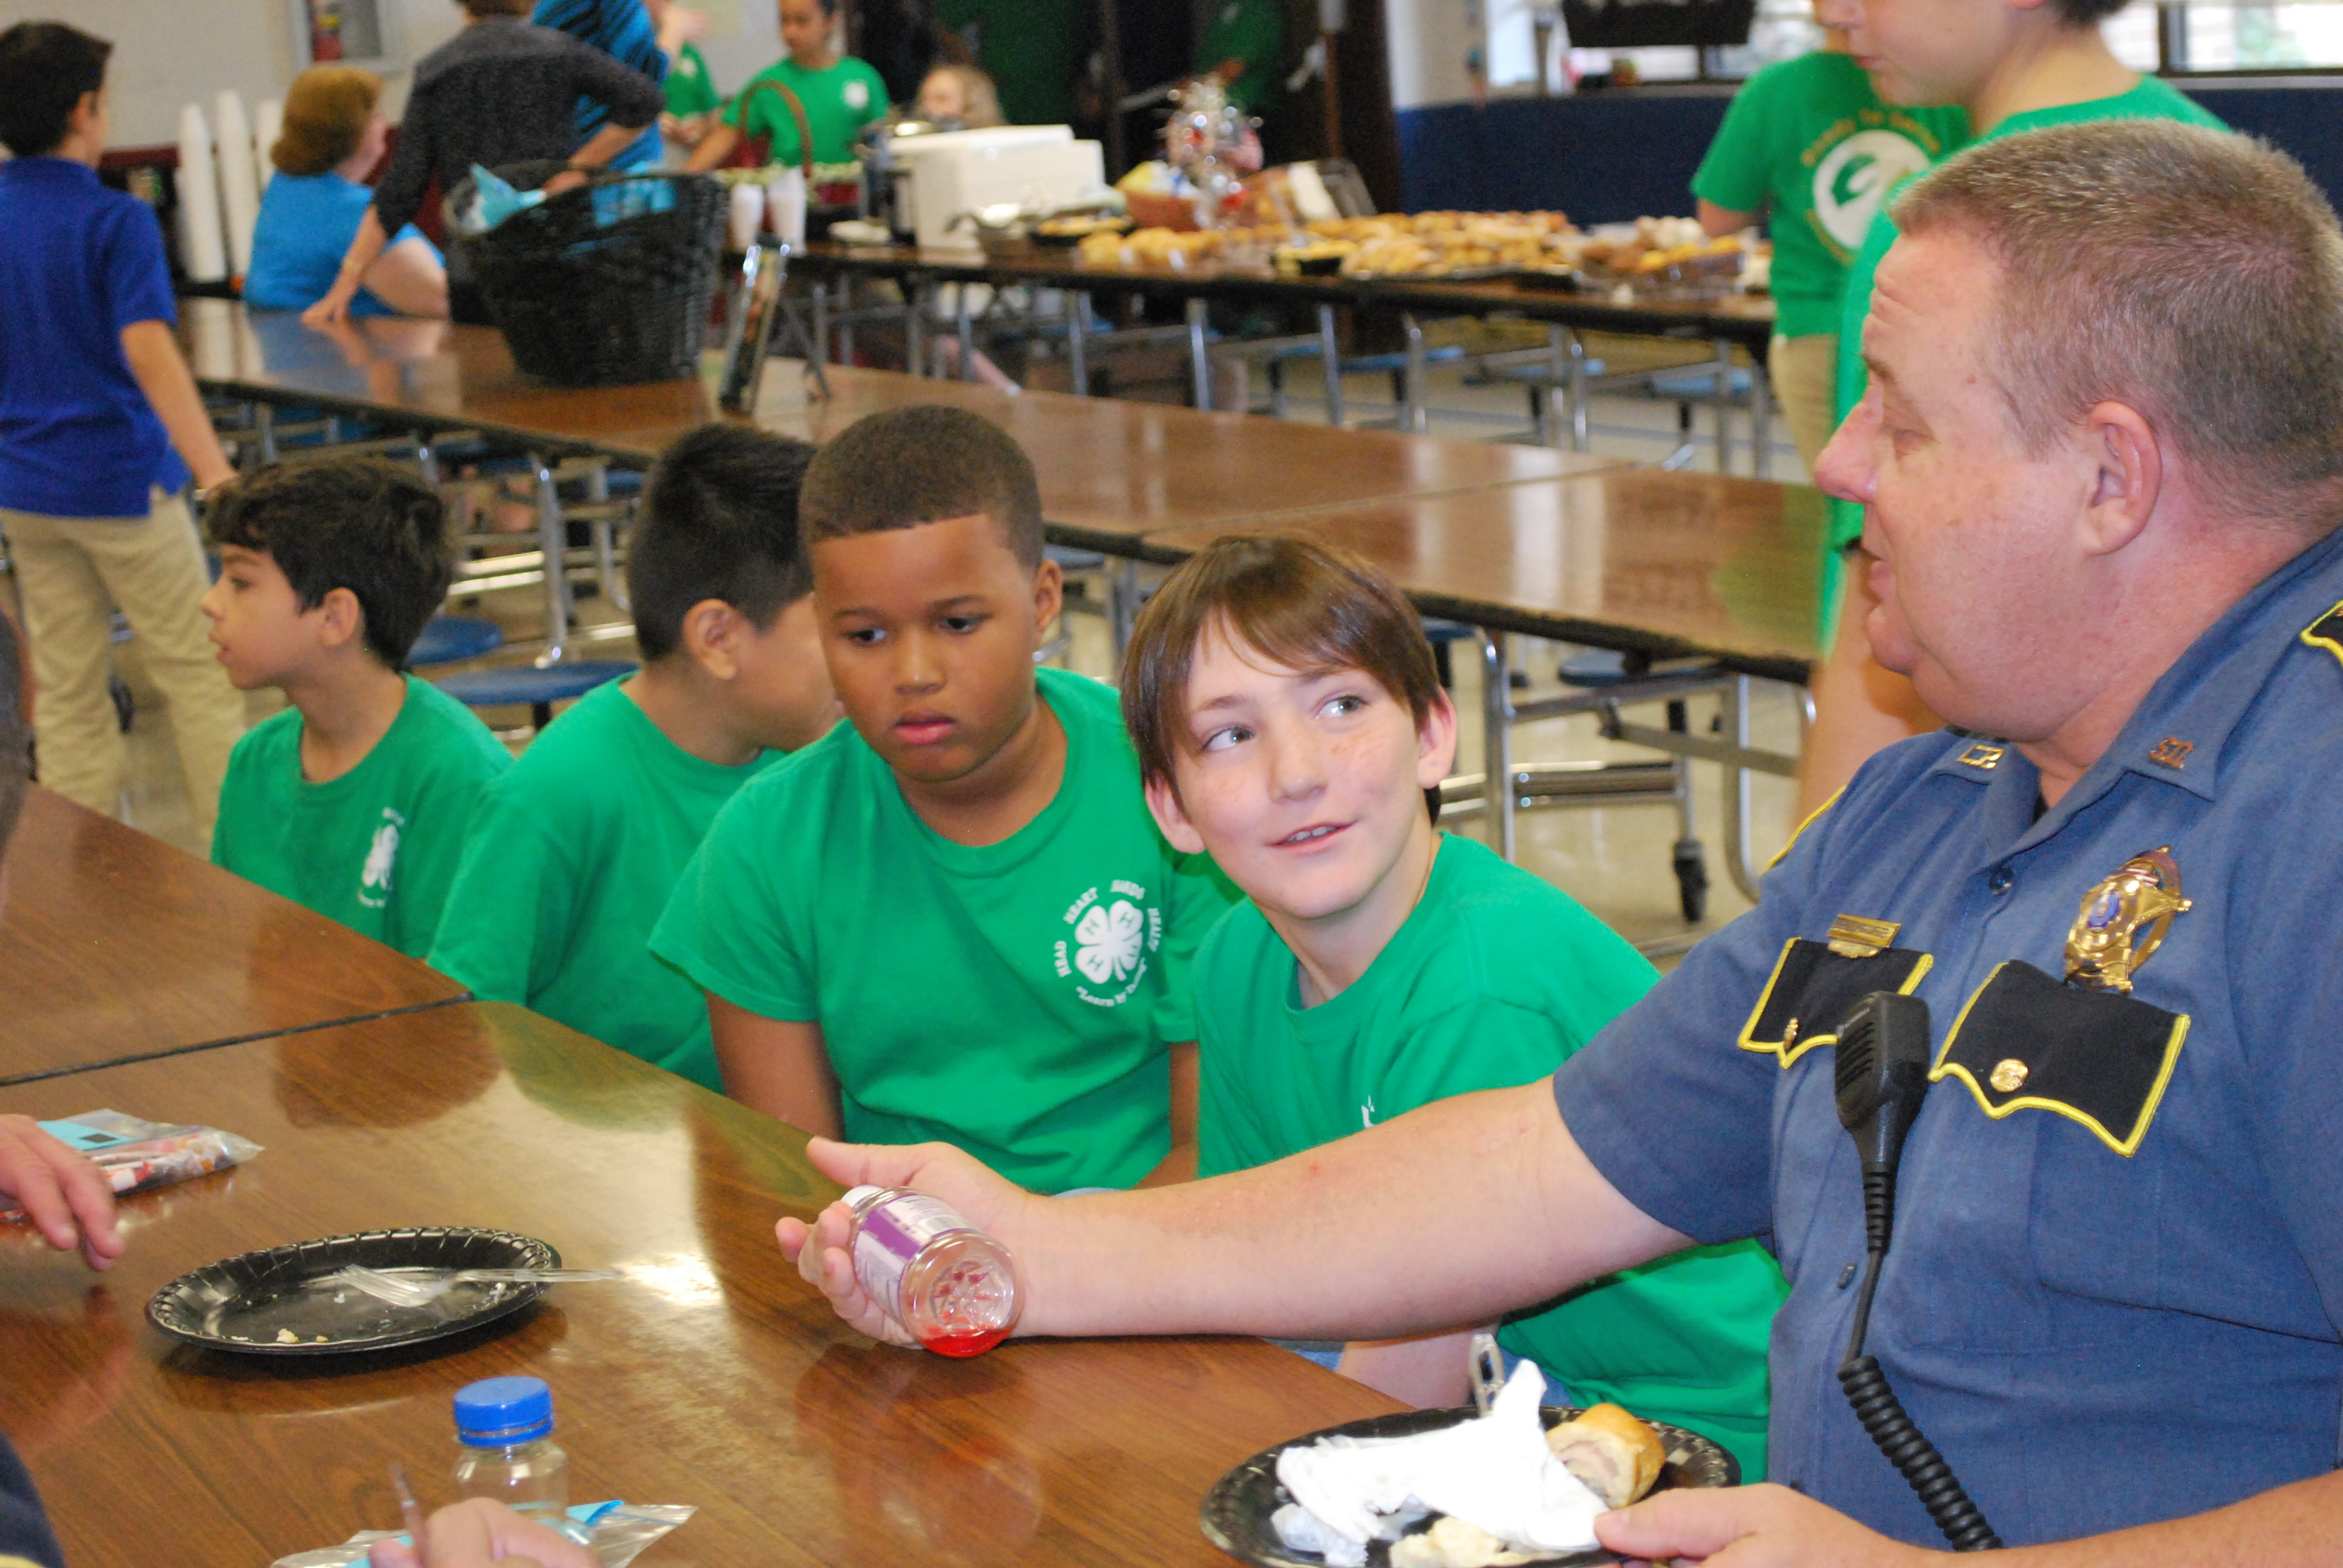 Livingston Parish School Resource Officer Burley McCarter talks with Lewis Vincent Elementary students Blaine Parsons and Juelz Walters during a special “Back the Blue” Day breakfast at the school.